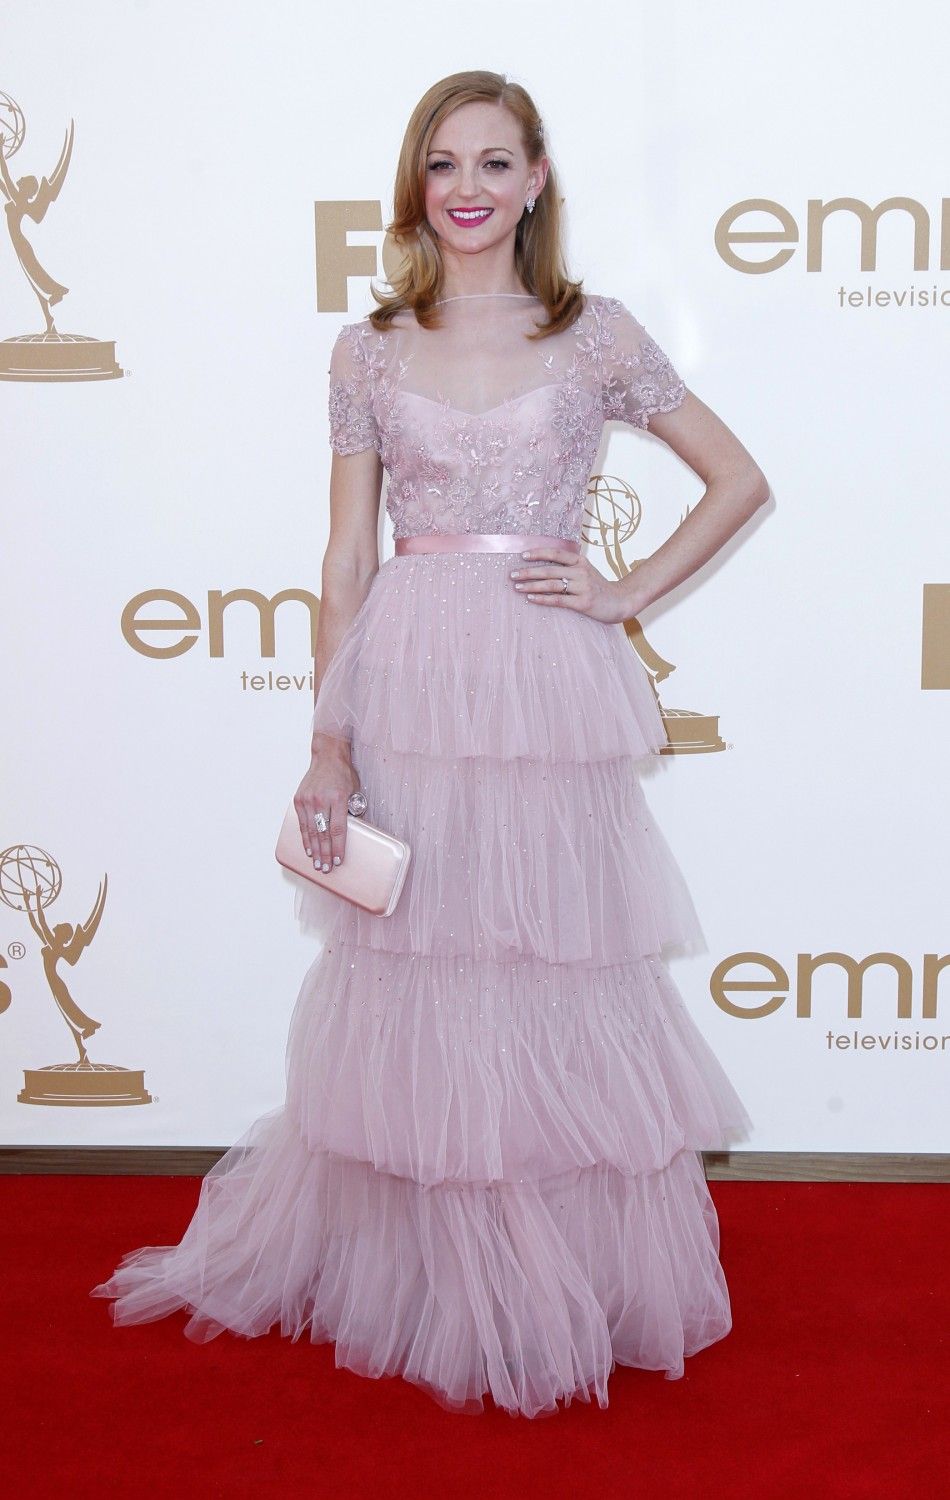 Actress Jayma Mays from quotGleequot arrives at the 63rd Primetime Emmy Awards in Los Angeles September 18, 2011. 